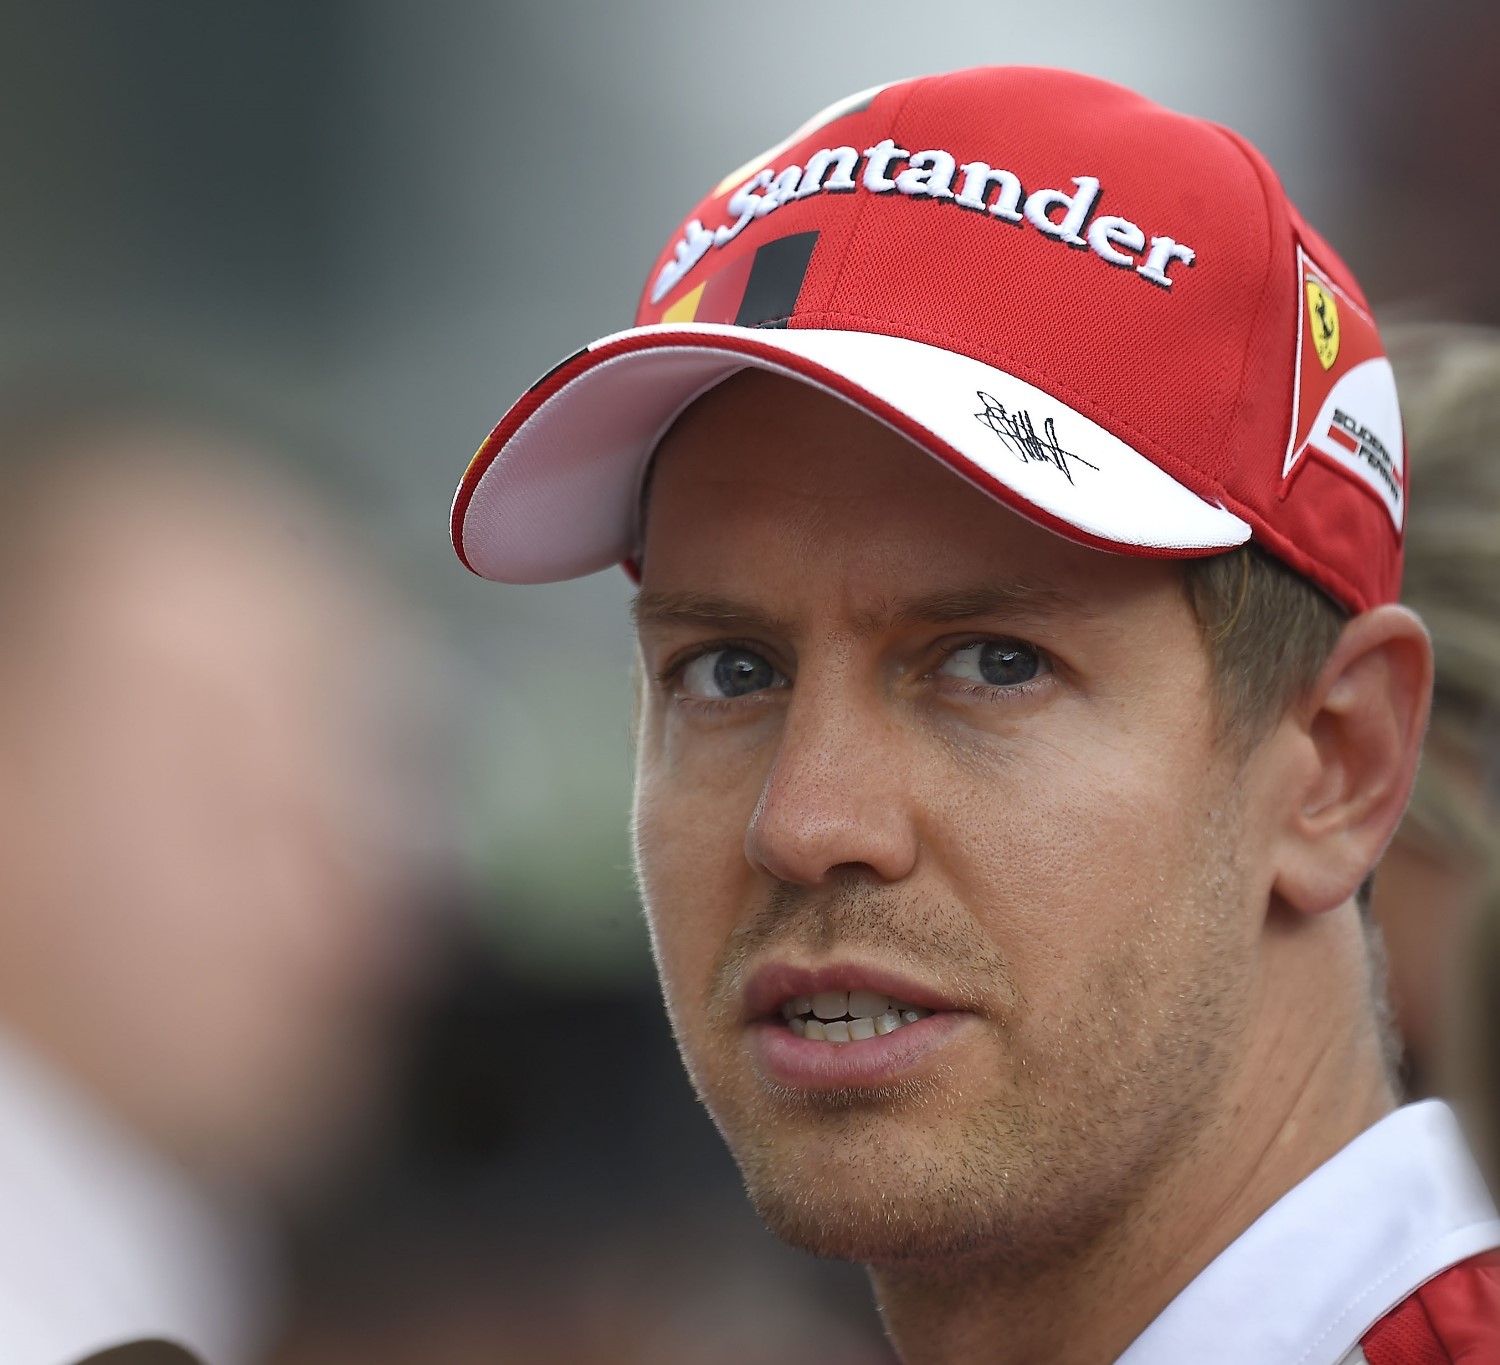 How big will Vettel's new deal with Ferrari be? He current 3-year deal was $50 million the first year, $30 million in years 2 and 3, plus bonuses for a package around $125 million